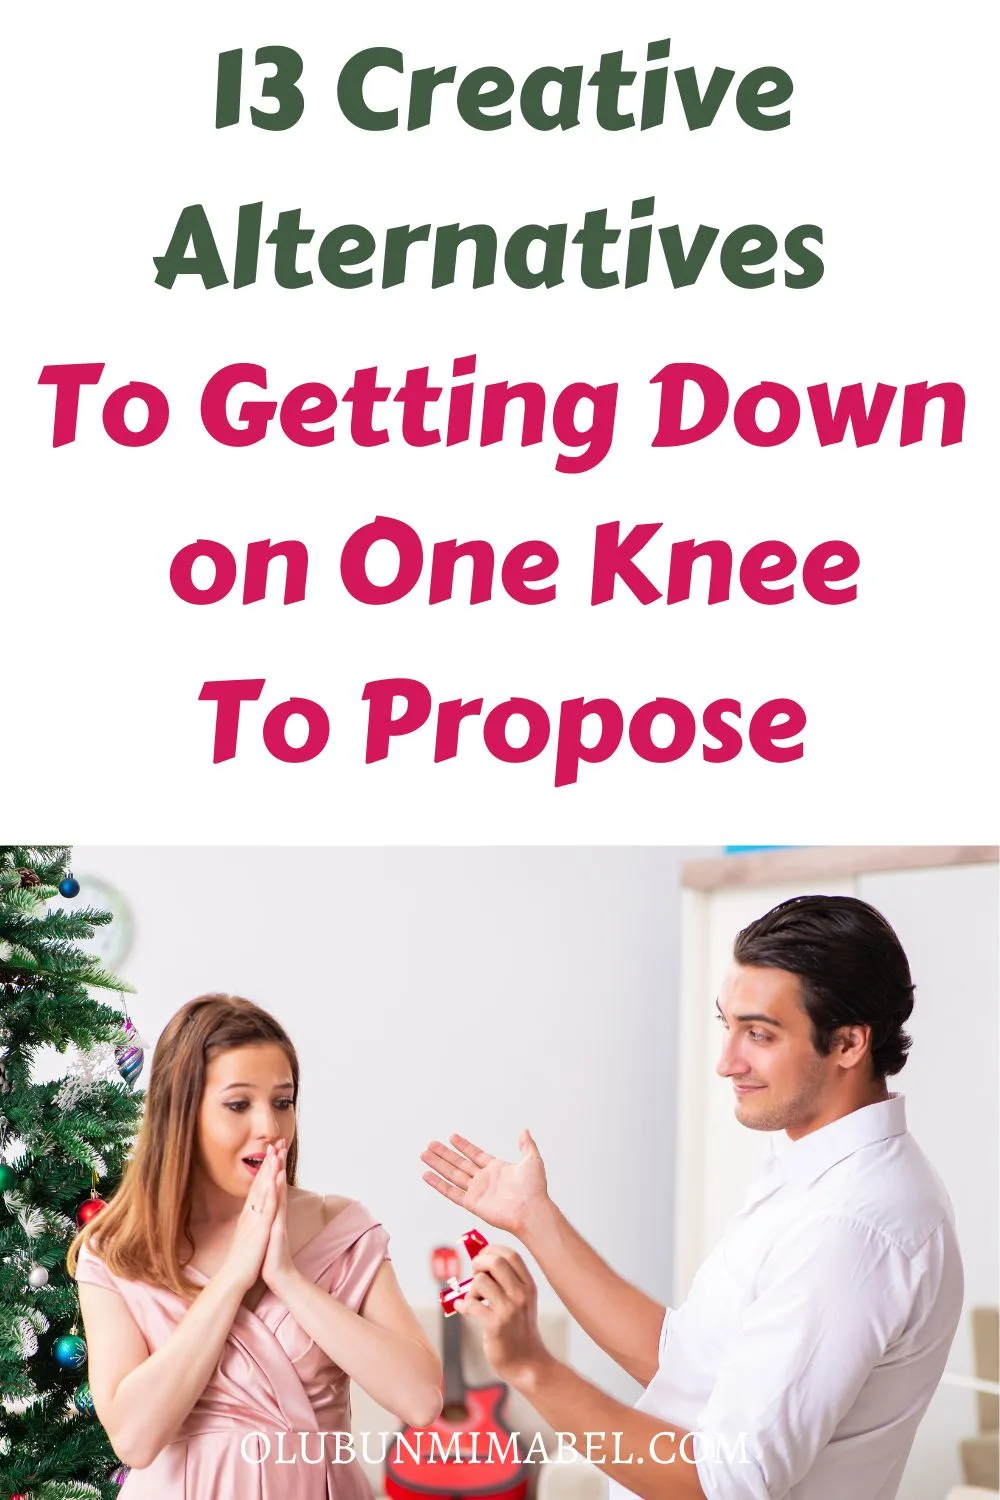 Alternatives To Getting Down on One Knee to Propose